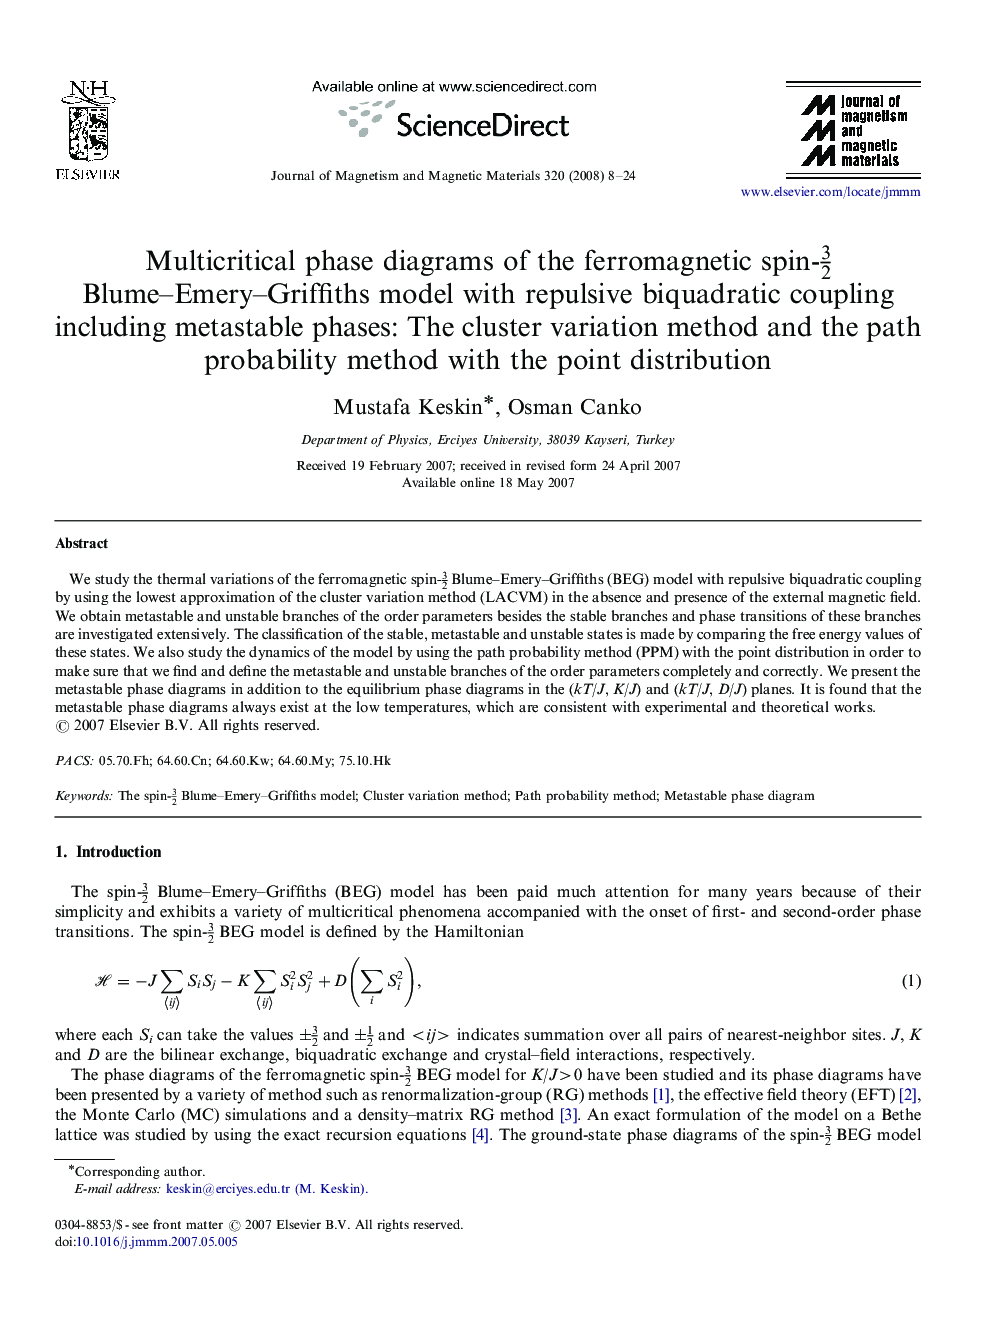 Multicritical phase diagrams of the ferromagnetic spin-32 Blume-Emery-Griffiths model with repulsive biquadratic coupling including metastable phases: The cluster variation method and the path probability method with the point distribution